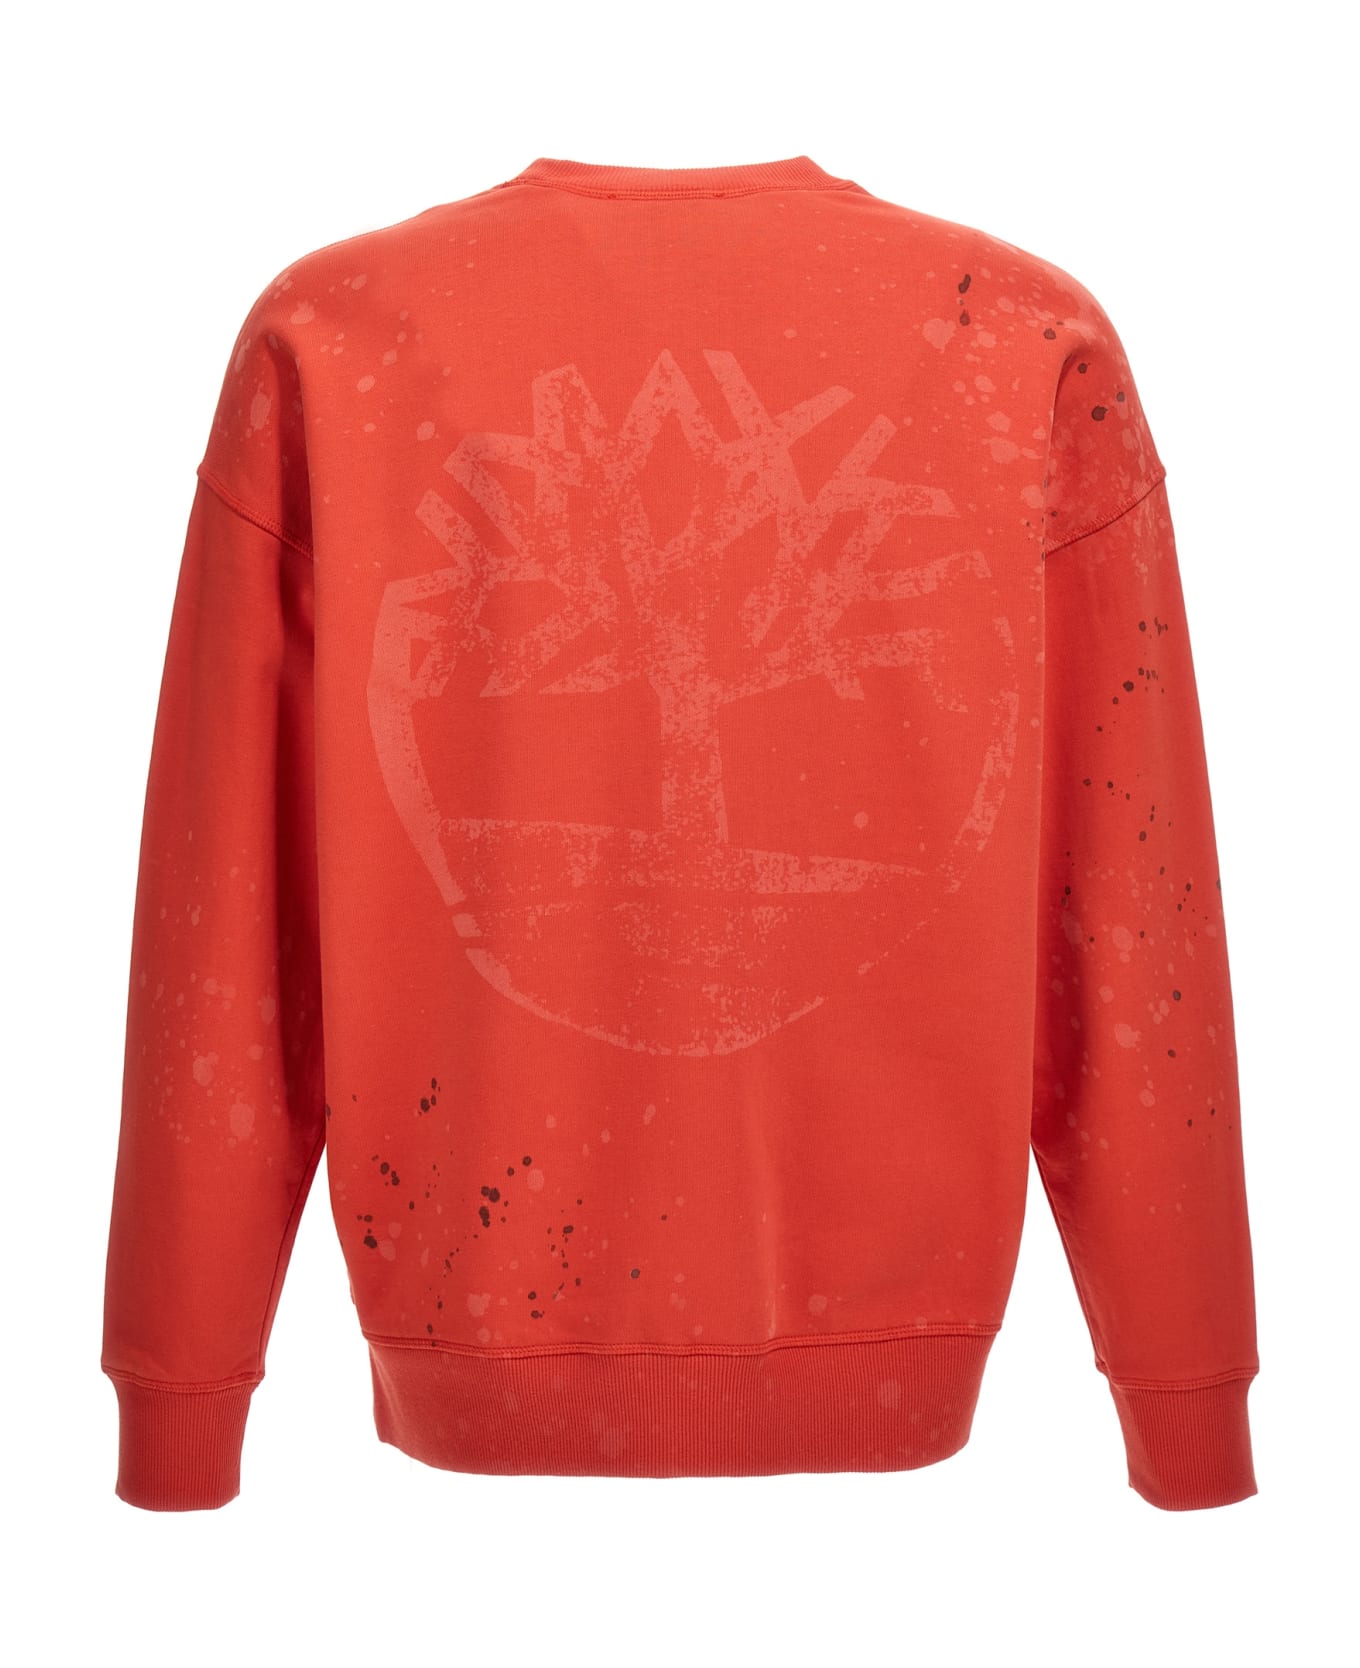 A-COLD-WALL Timberland A-cold-wall* Capsule Sweatshirt - Red フリース